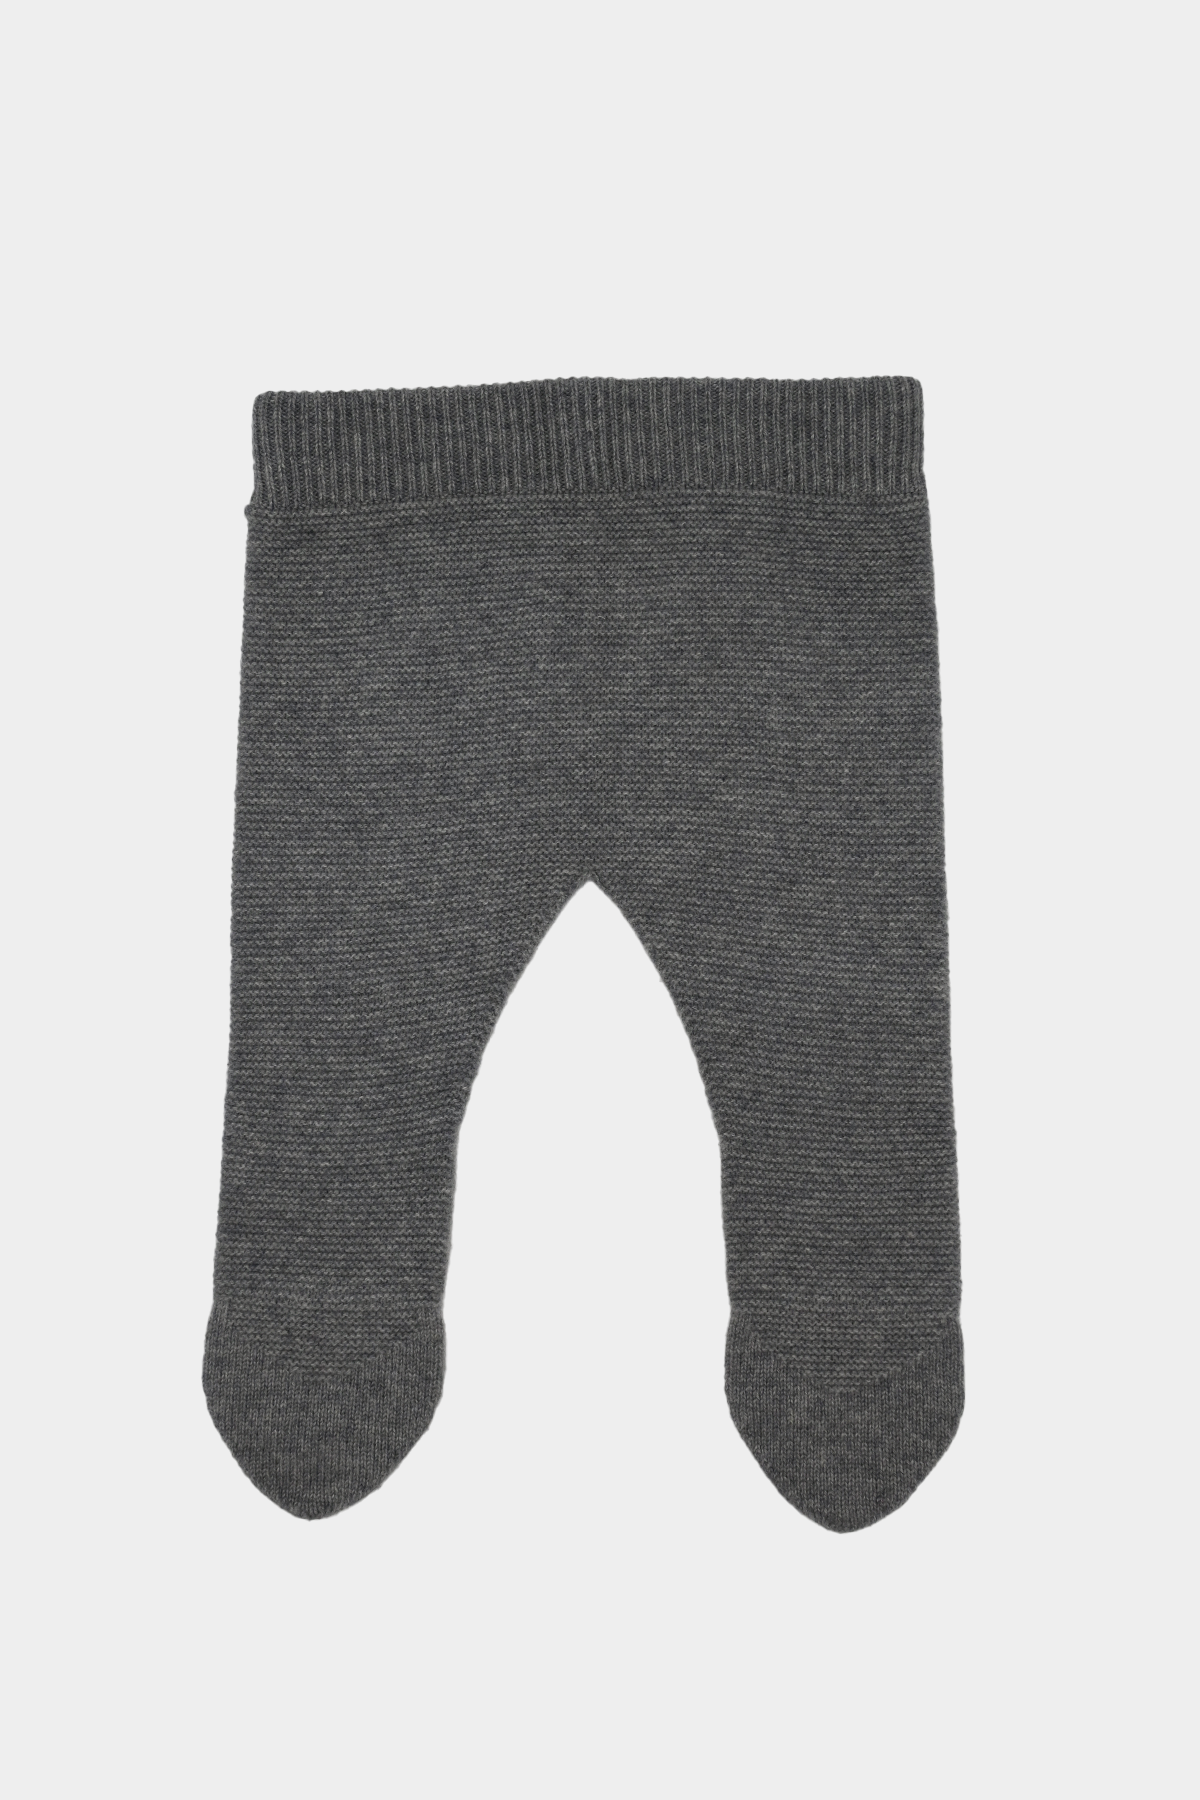 Double Layer Cashmere Baby Pants